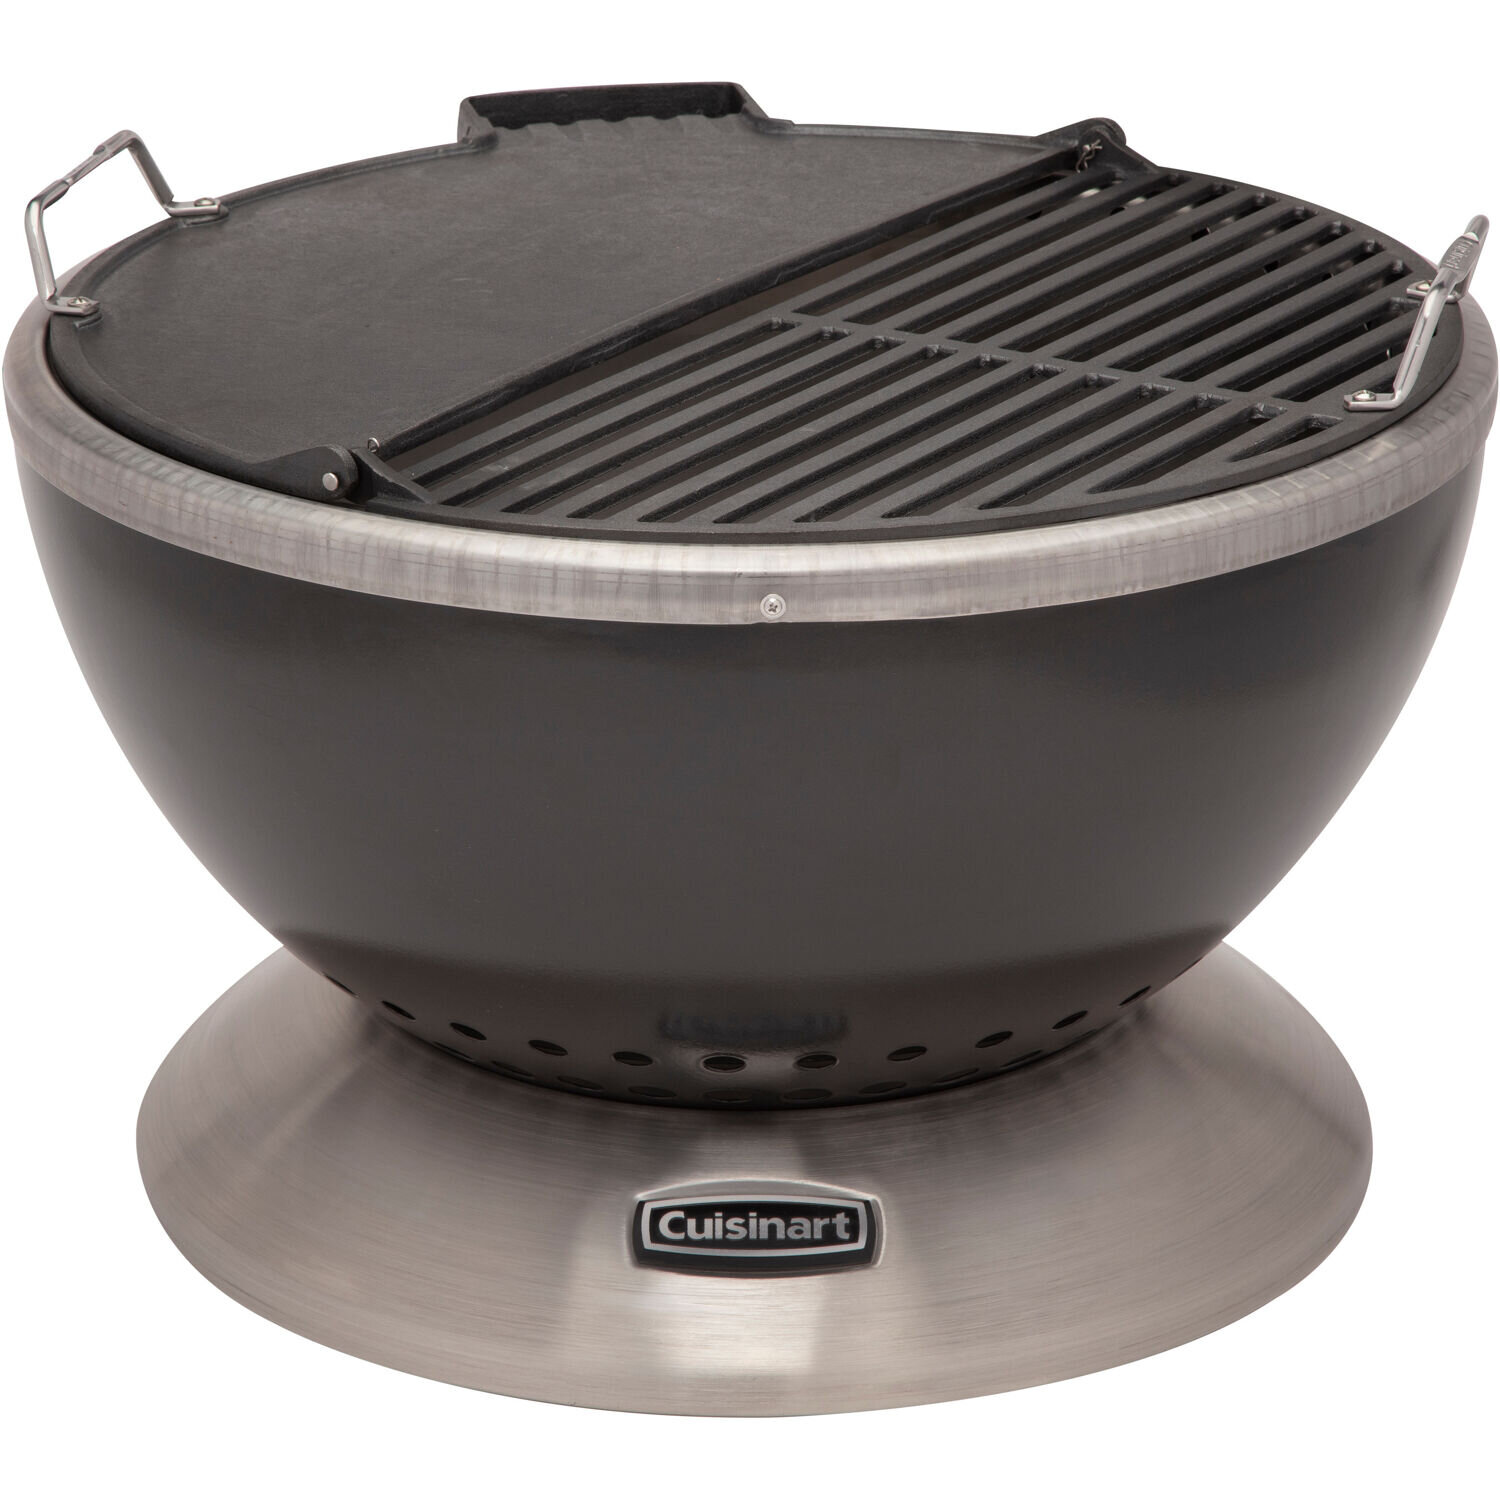 Cuisinart 3-in-1 Five Burner Gas Grill Cast Iron Griddle – Even Embers